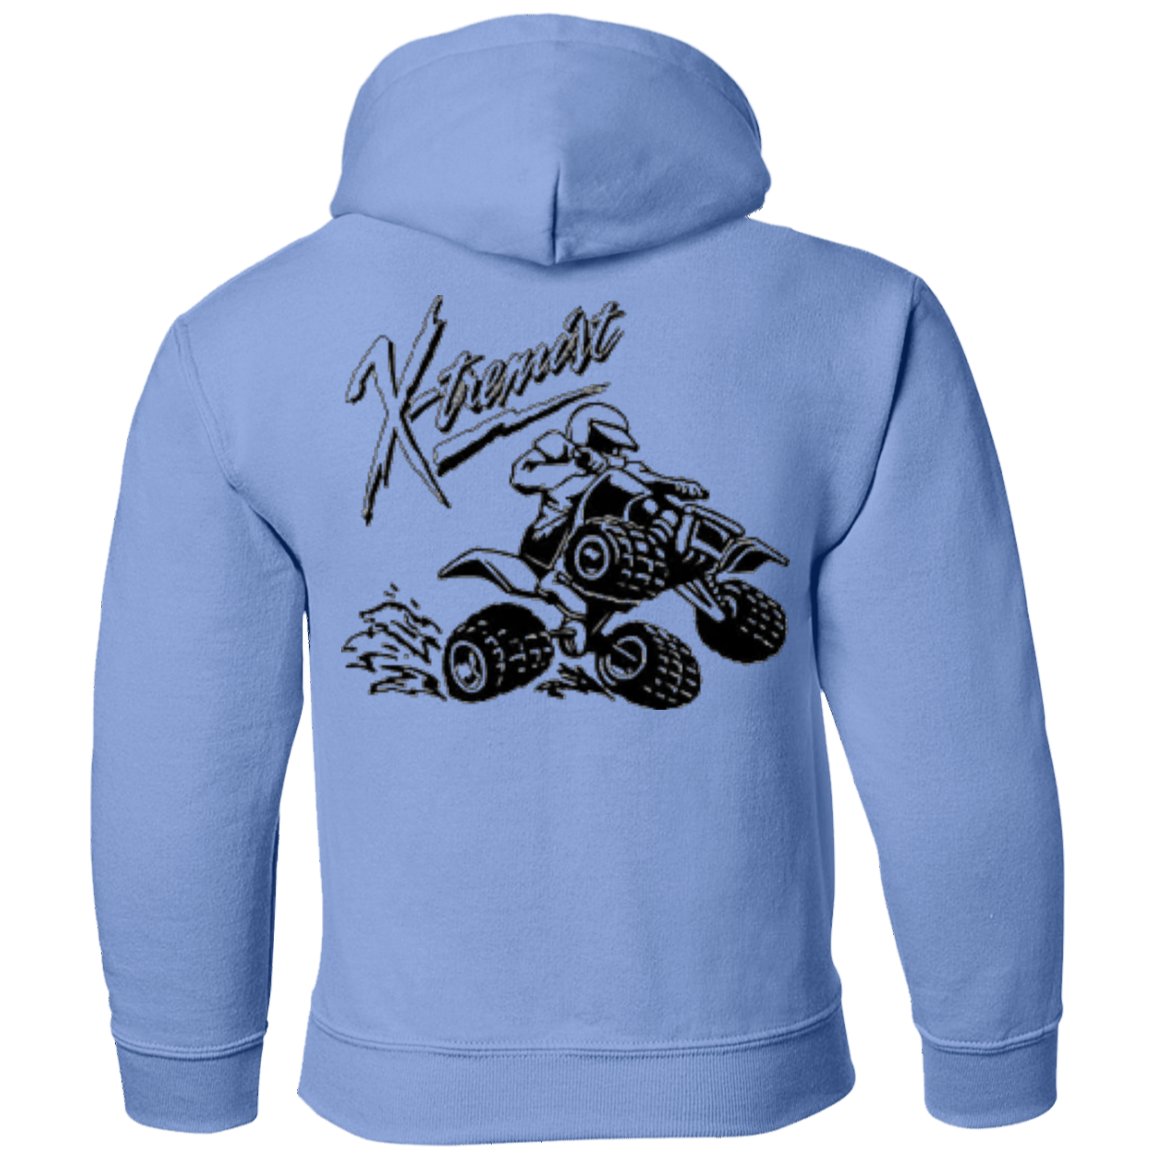 Youth 4-wheeler extreme pullover Hoodie front and back print